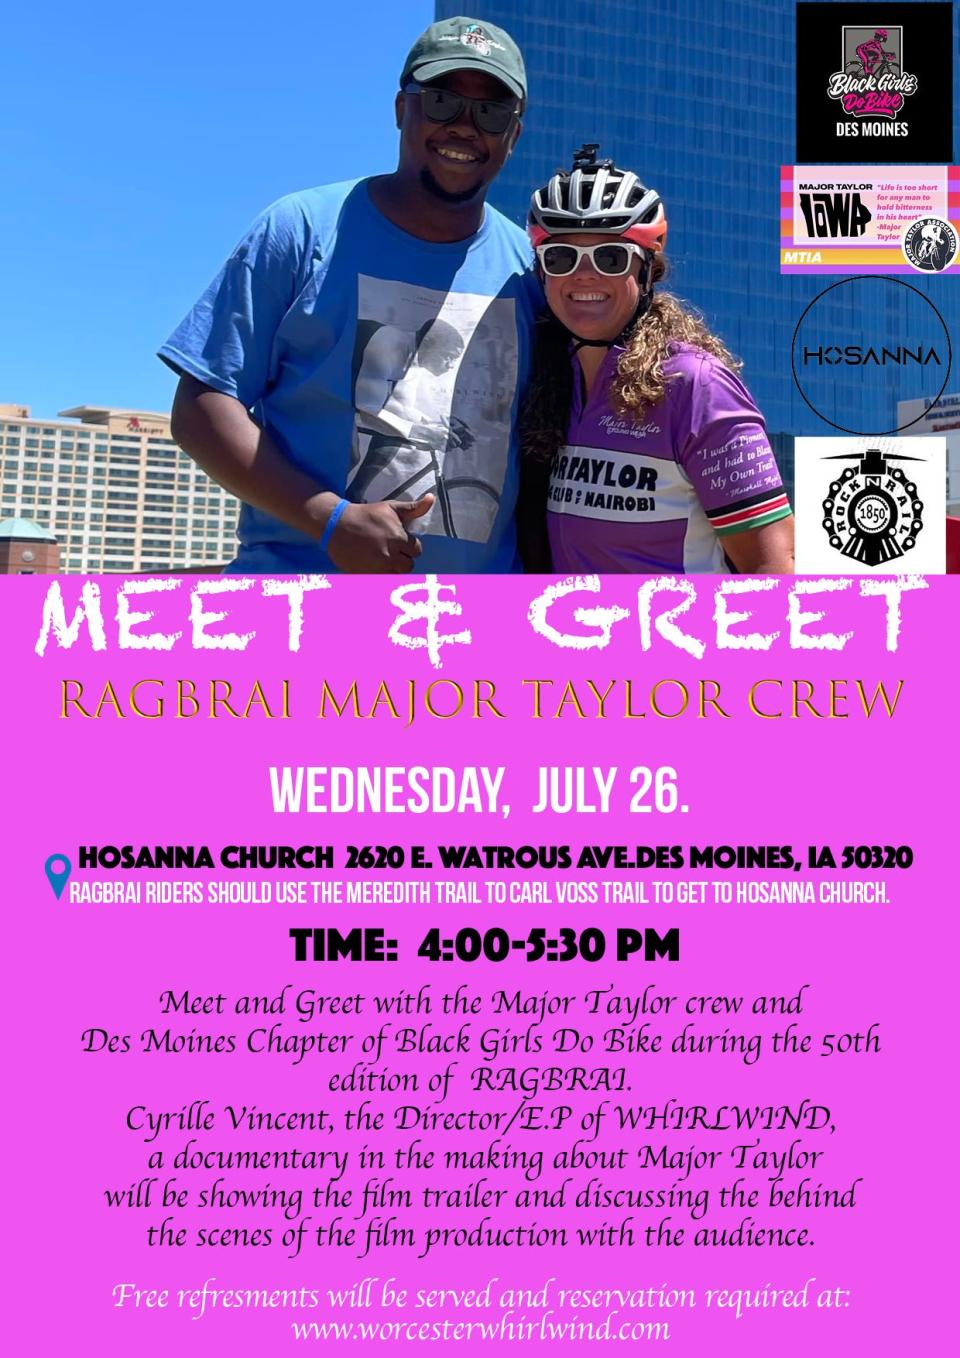 A Meet & Greet with Cyrille Vincent, director and executive producer of "Whirlwind: The Story of Major Taylor, July 26, 2023, 4:00 - 5:30 PM at Hosanna Church in Des Moines. The event is co-sponsored by Black Girls Do Bike and Major Taylor Iowa Cycling Club.